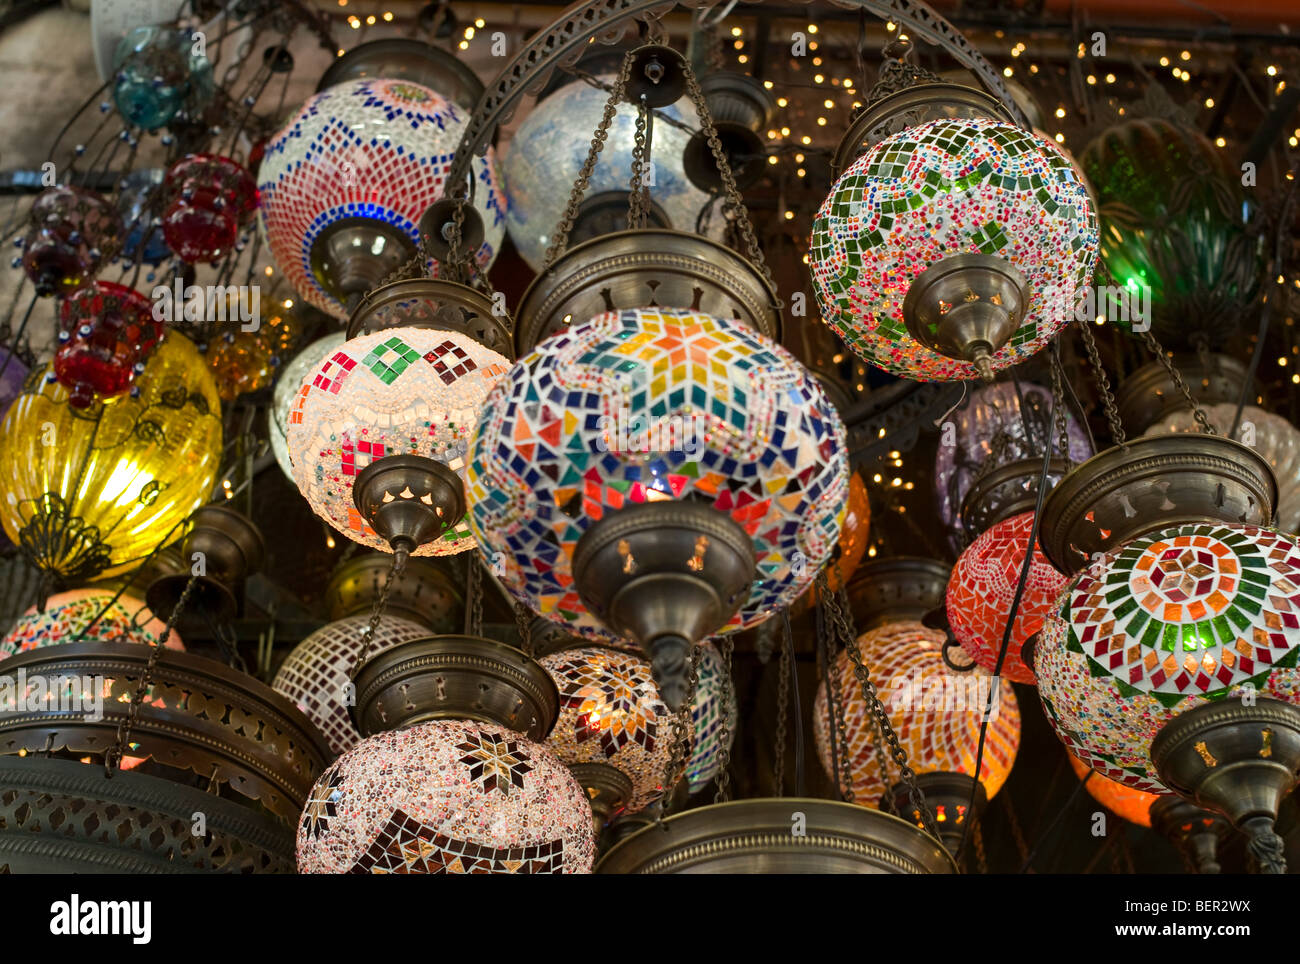 Lamps at a Bazaar in Istanbul Stock Photo